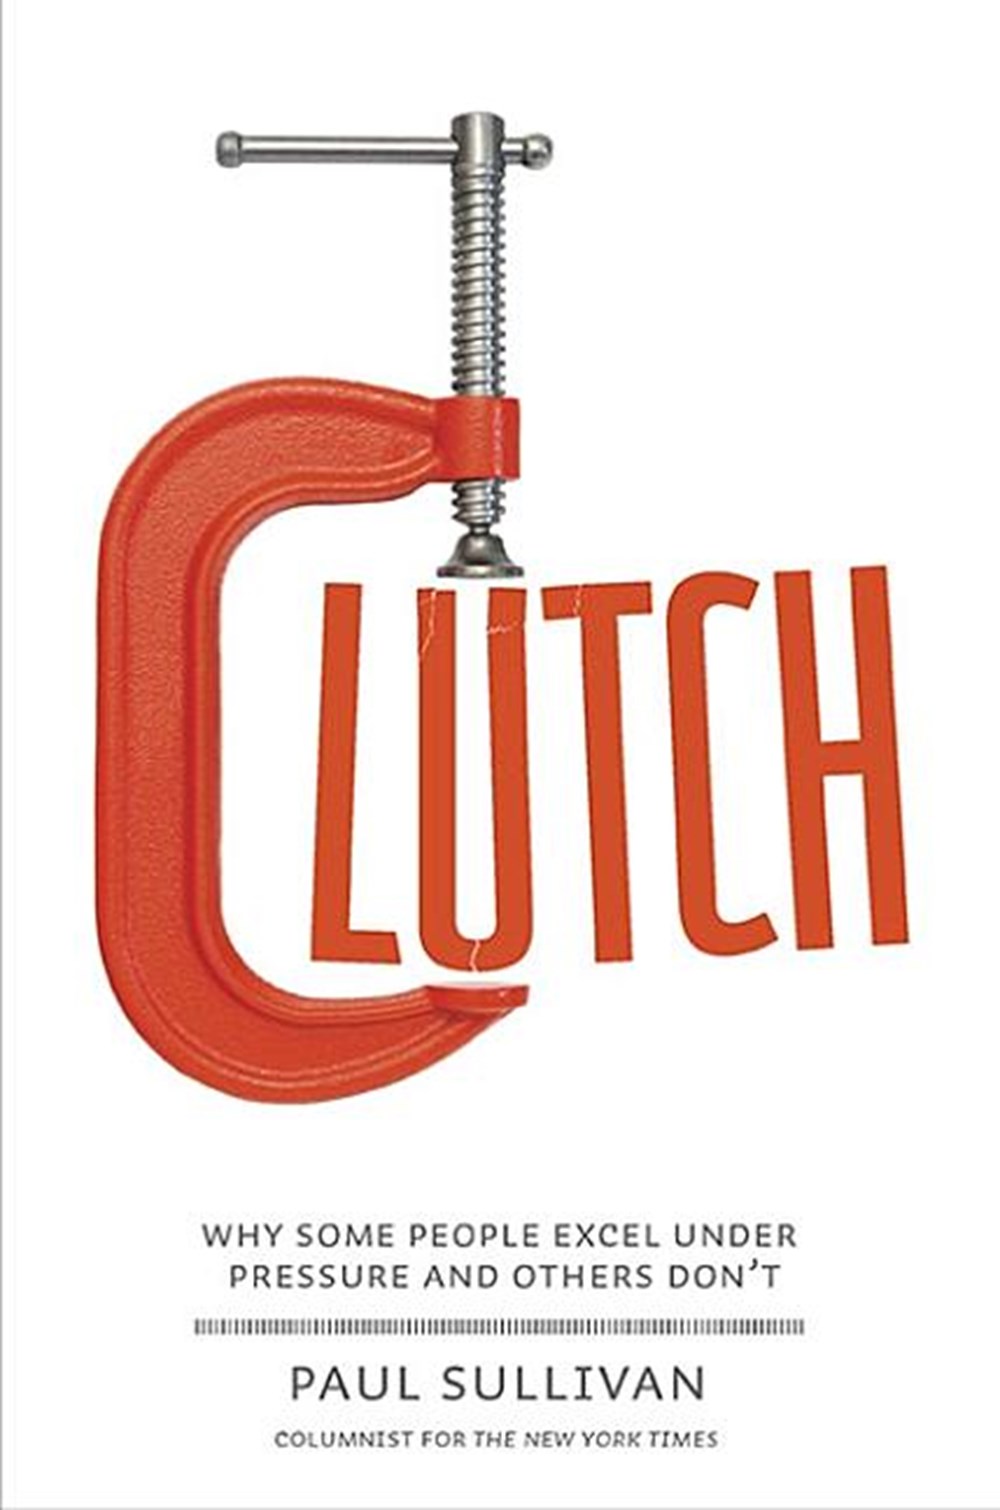 Clutch Why Some People Excel Under Pressure and Others Don't